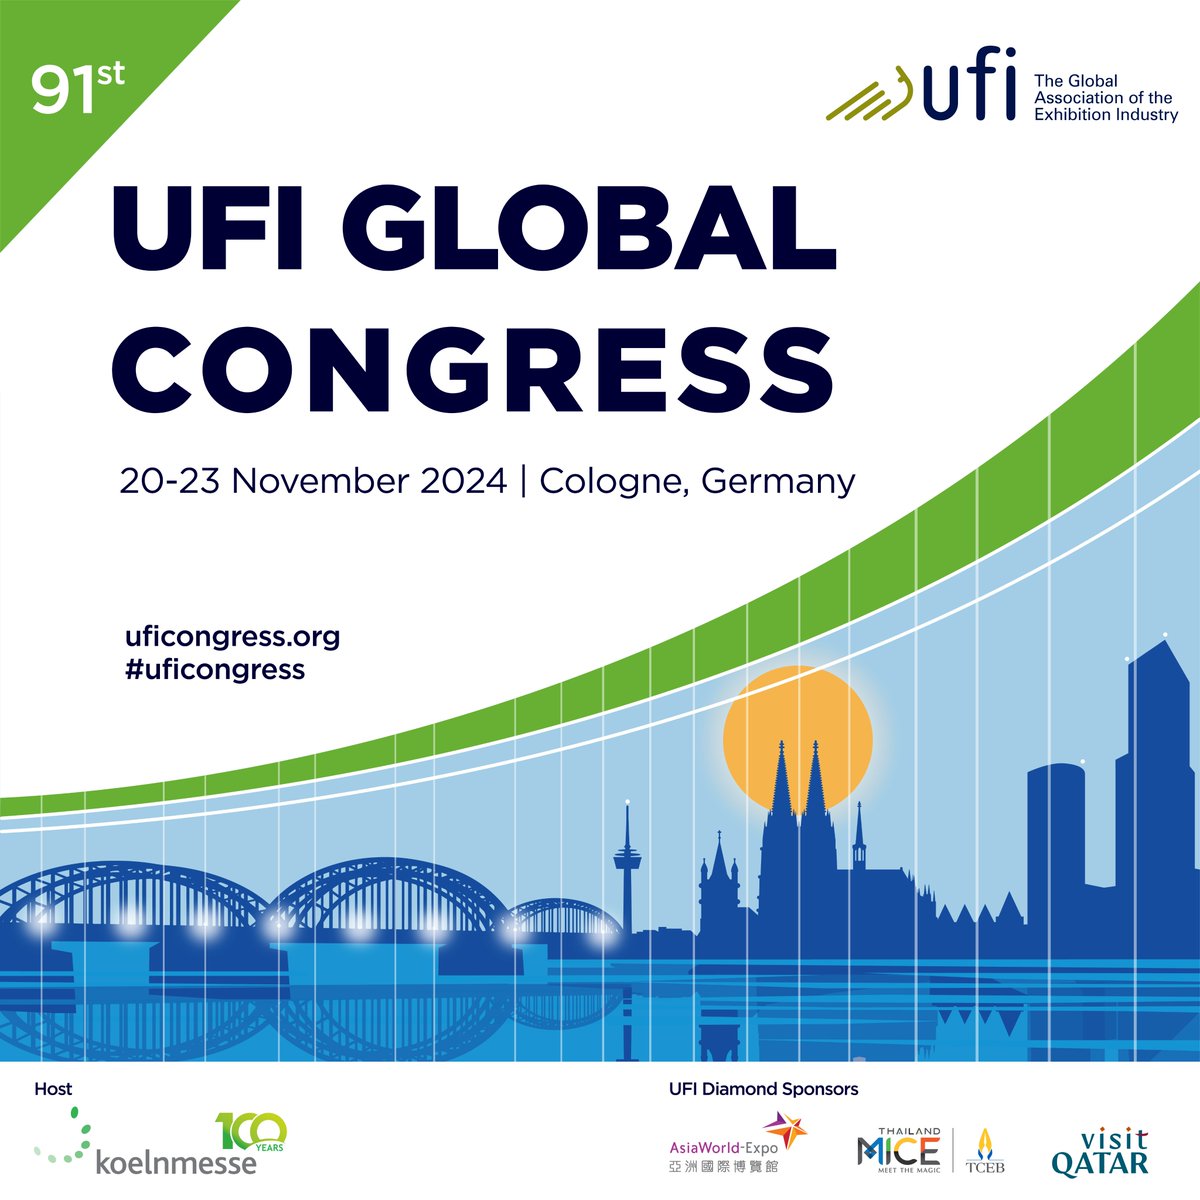 🥳 Registration for the 91st UFI Global Congress is now OPEN! 📅 Join us from 20-23 November 2024, hosted by @Koelnmesse, for our industry's most important annual gathering. 🔗 Secure your spot now: uficongress.org #ufi #ufievents #uficongress #koelnmesse #eventprofs